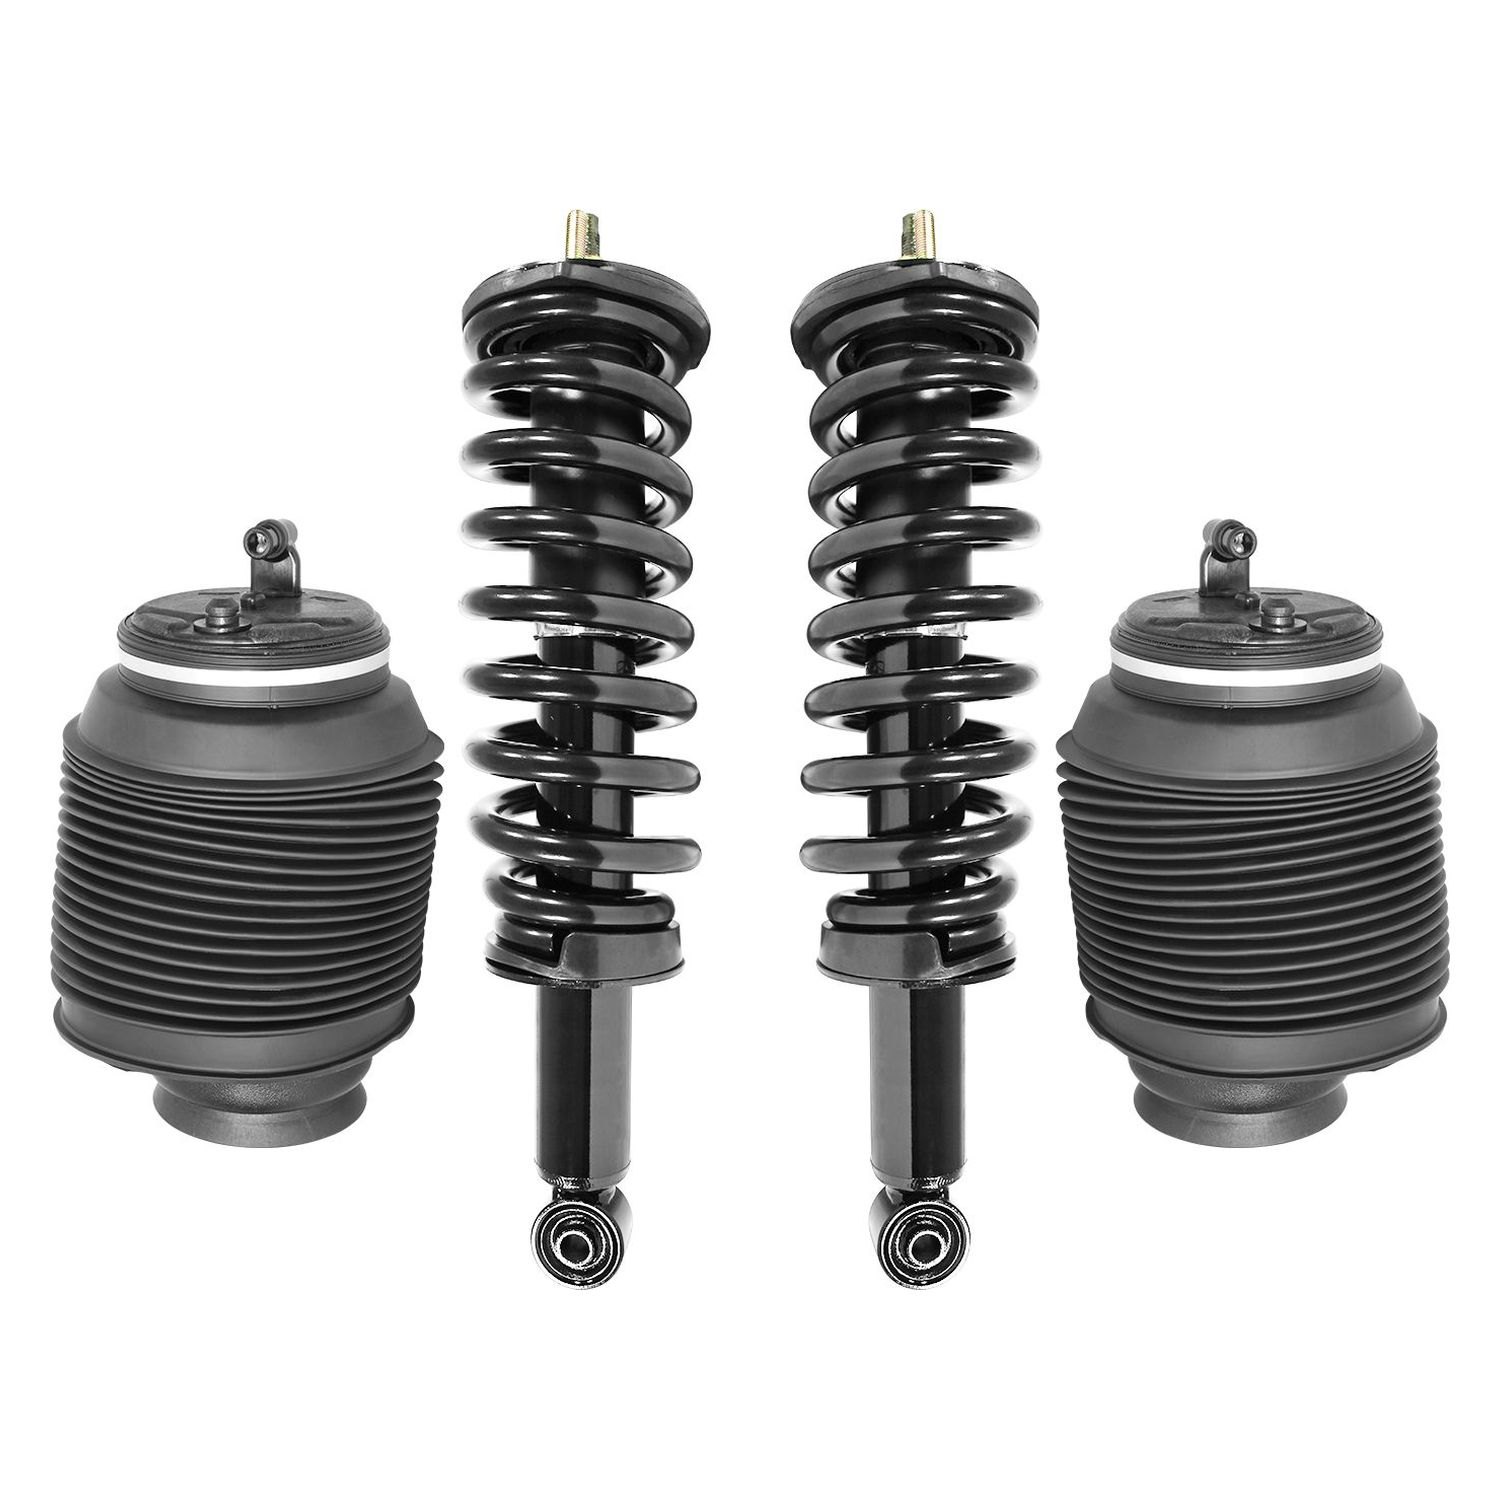 Air to coil springs on a 2005 Toyota Sequoia | Toyota Nation Forum 2005 Toyota Sequoia Rear Suspension Conversion Kit